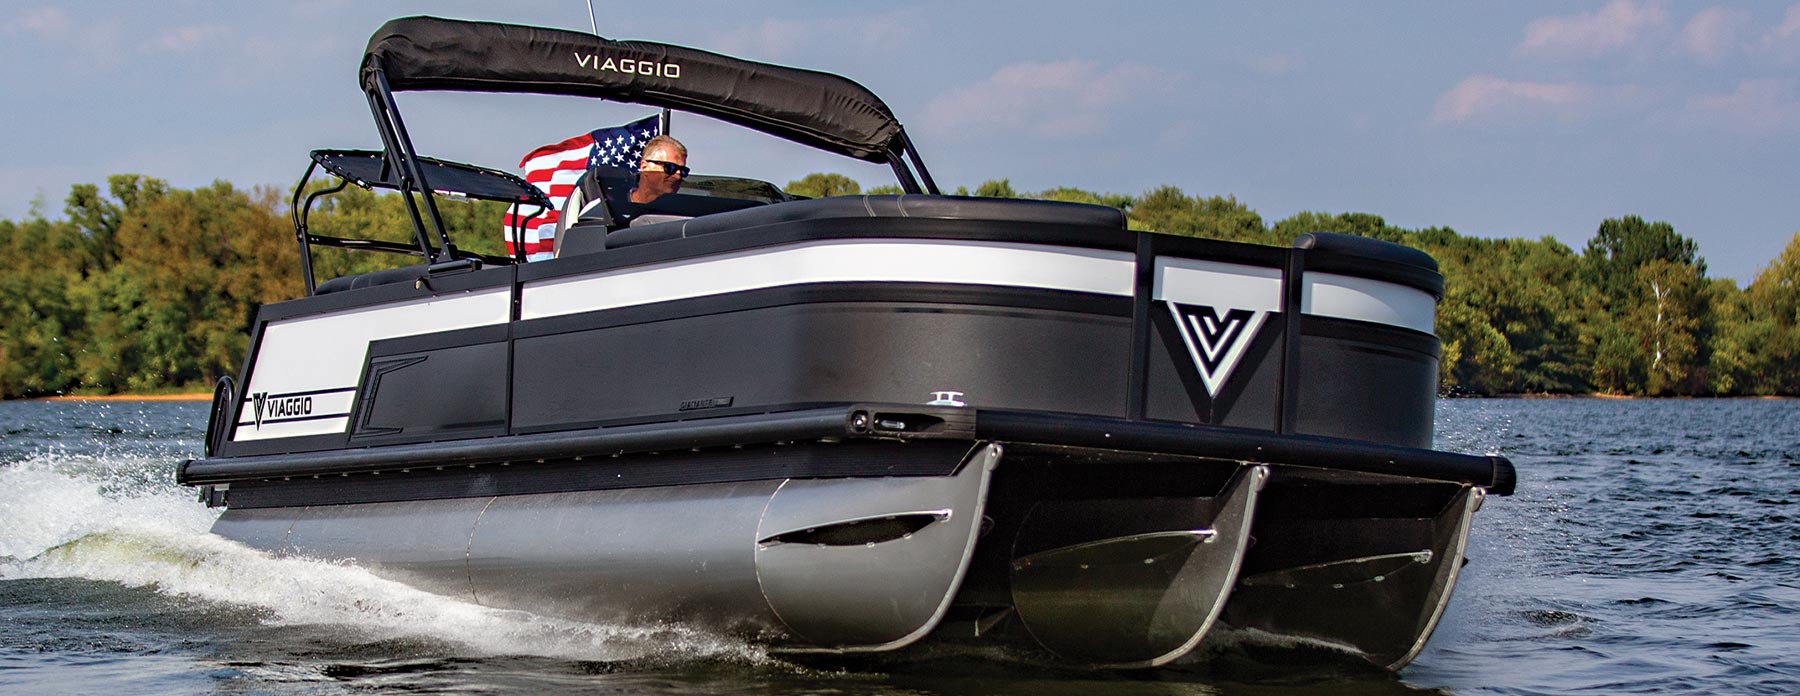 starboard side view of a man wearing sunglasses, operating a black Viaggio Diamante 26U pontoon on an enclosed body of water